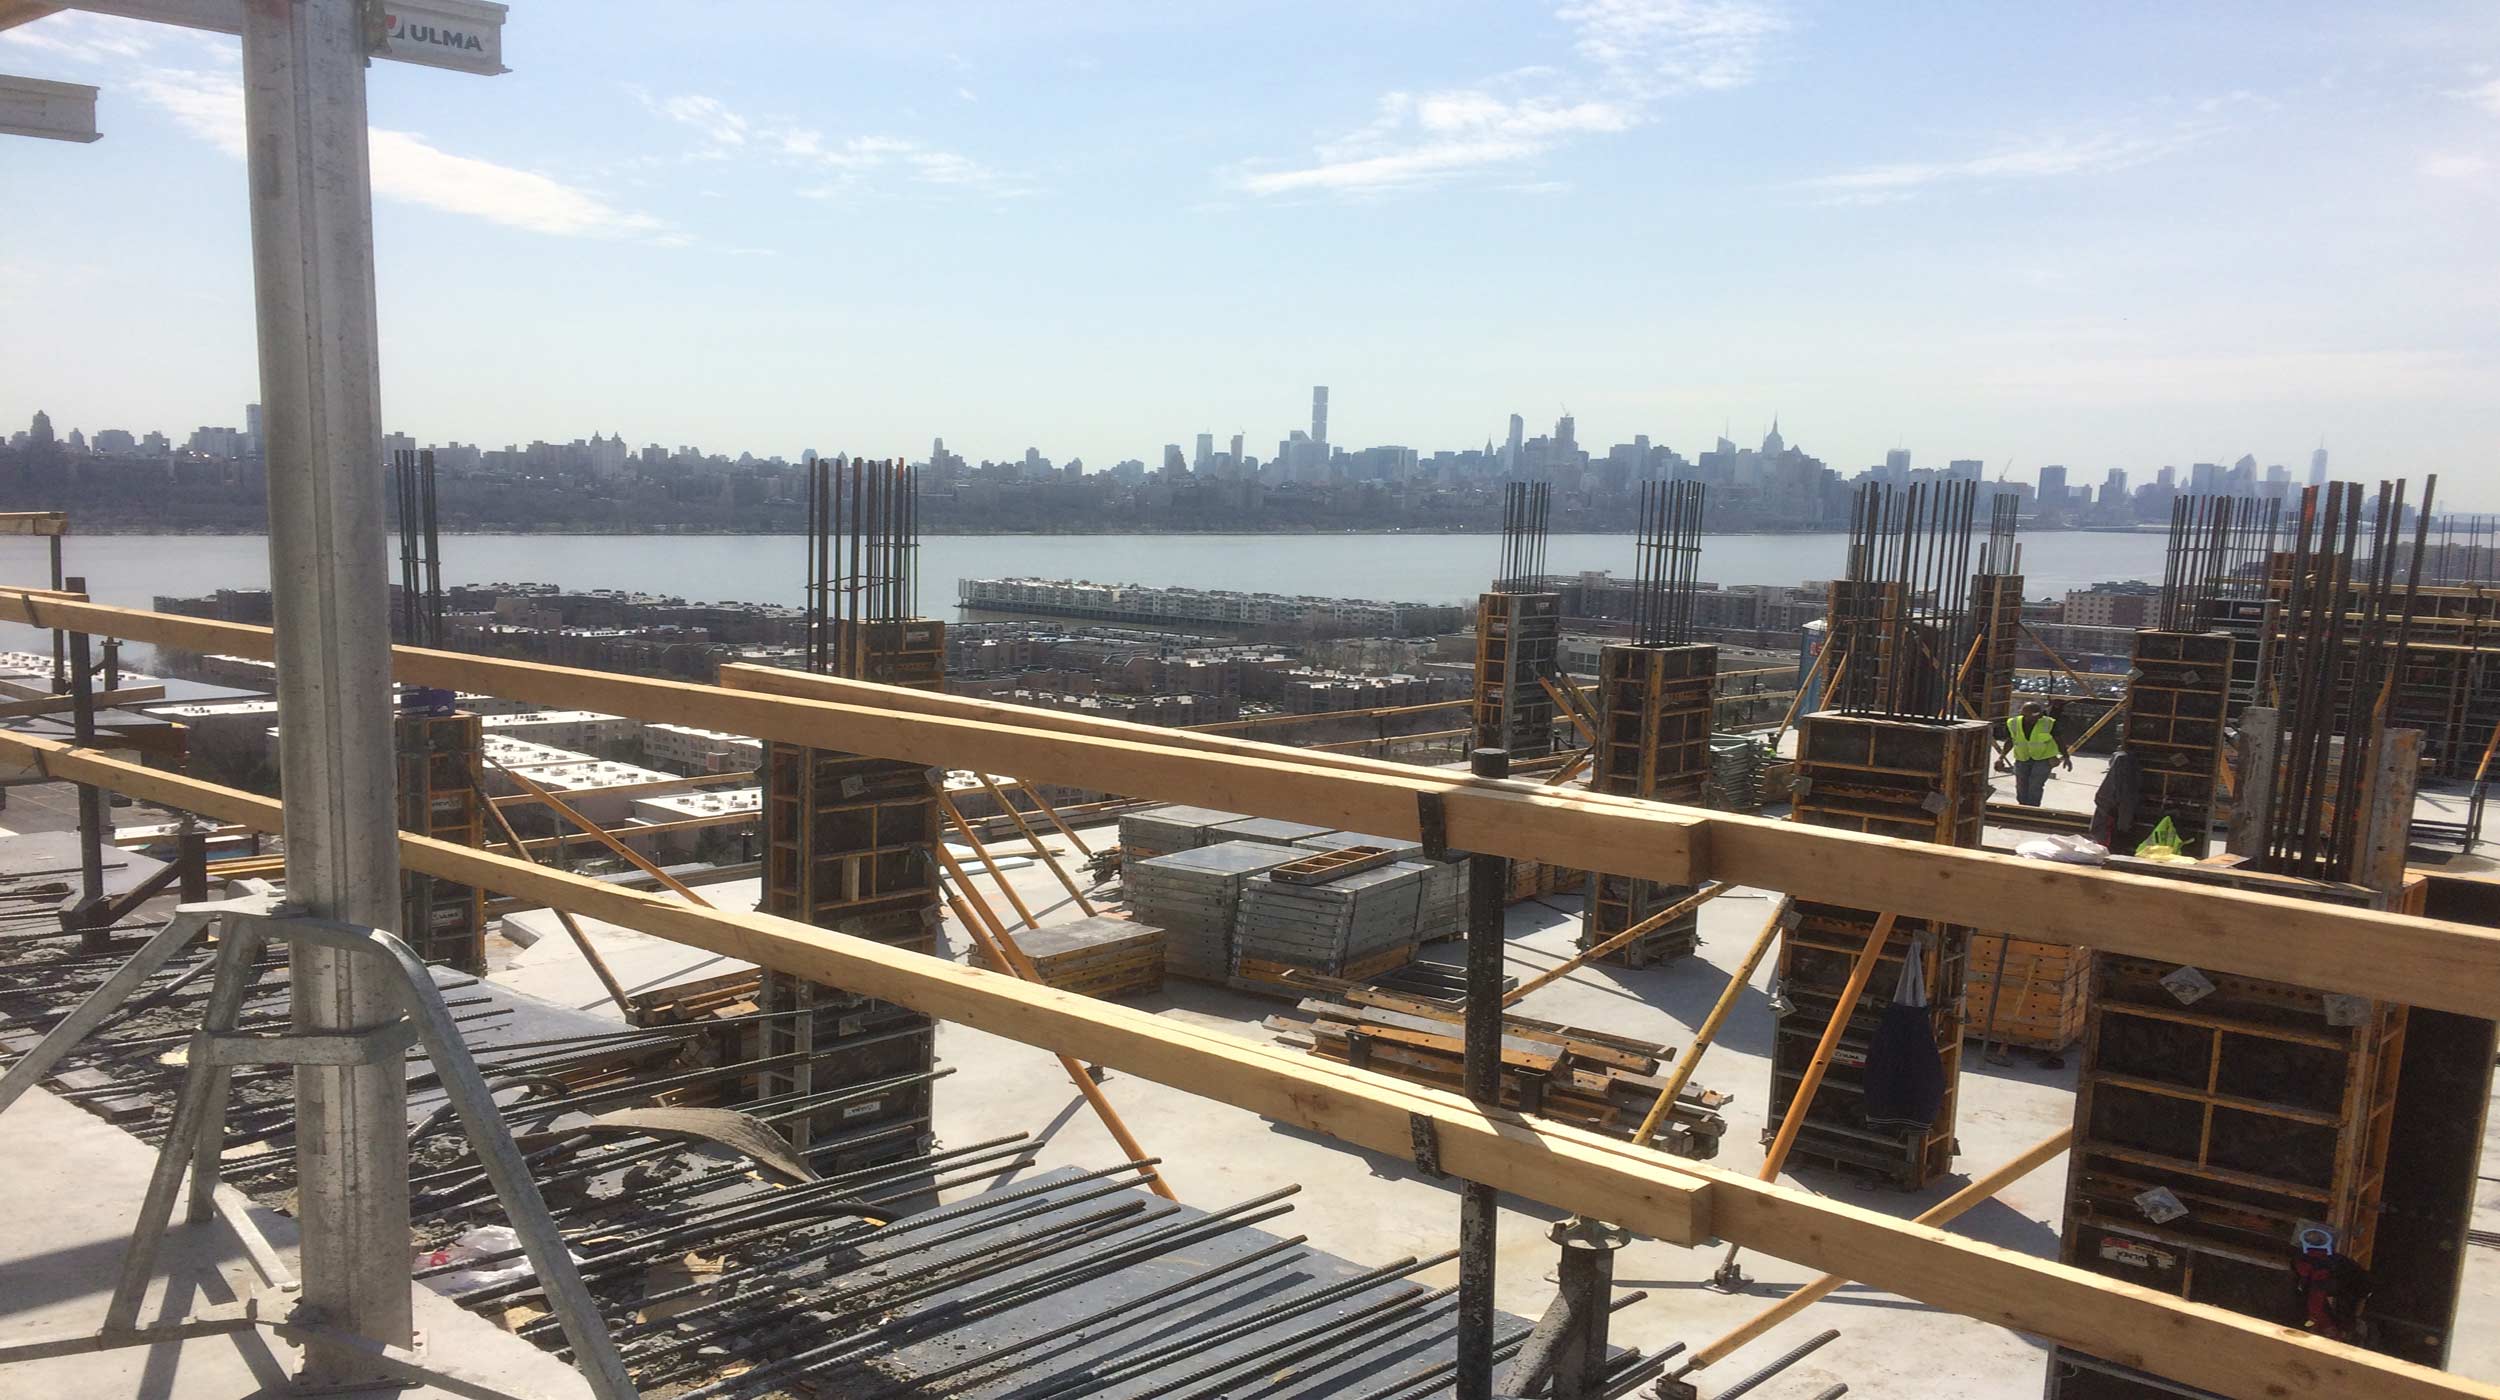 ULMA’s new MEGAFRAME frame shoring system provides versatility and high productivity in the centerpiece in New York City's newest entertainment district.